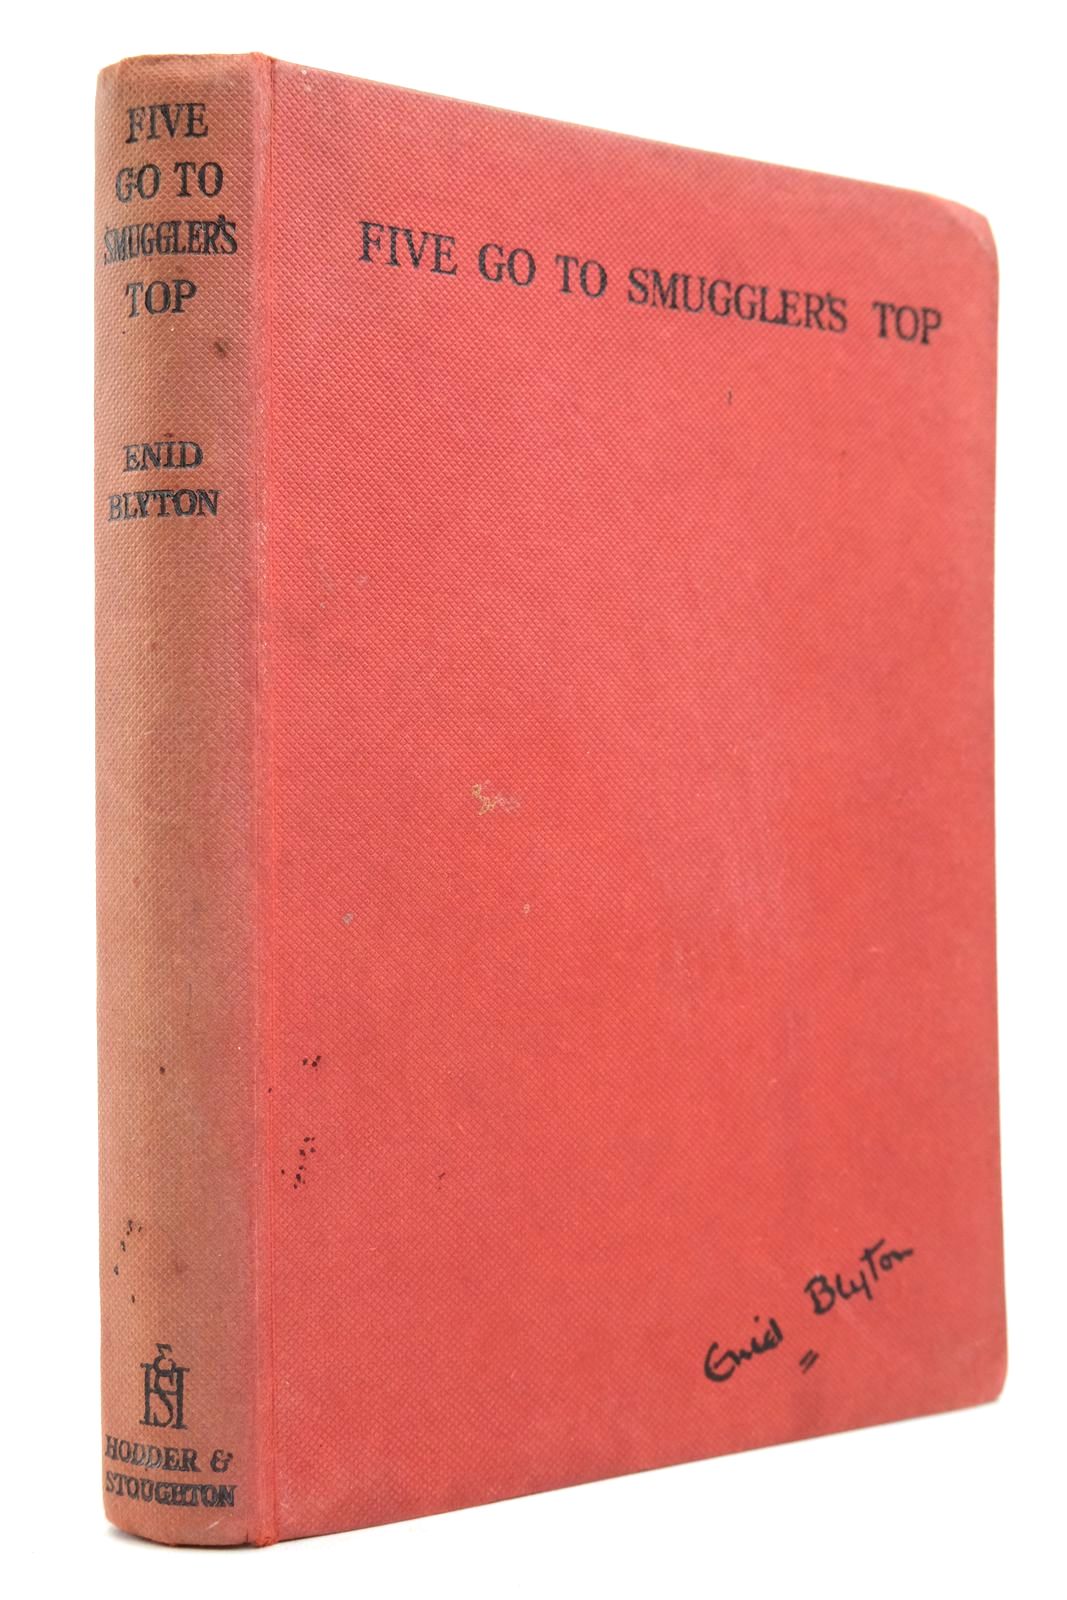 Photo of FIVE GO TO SMUGGLER'S TOP written by Blyton, Enid illustrated by Soper, Eileen published by Hodder & Stoughton (STOCK CODE: 2140488)  for sale by Stella & Rose's Books